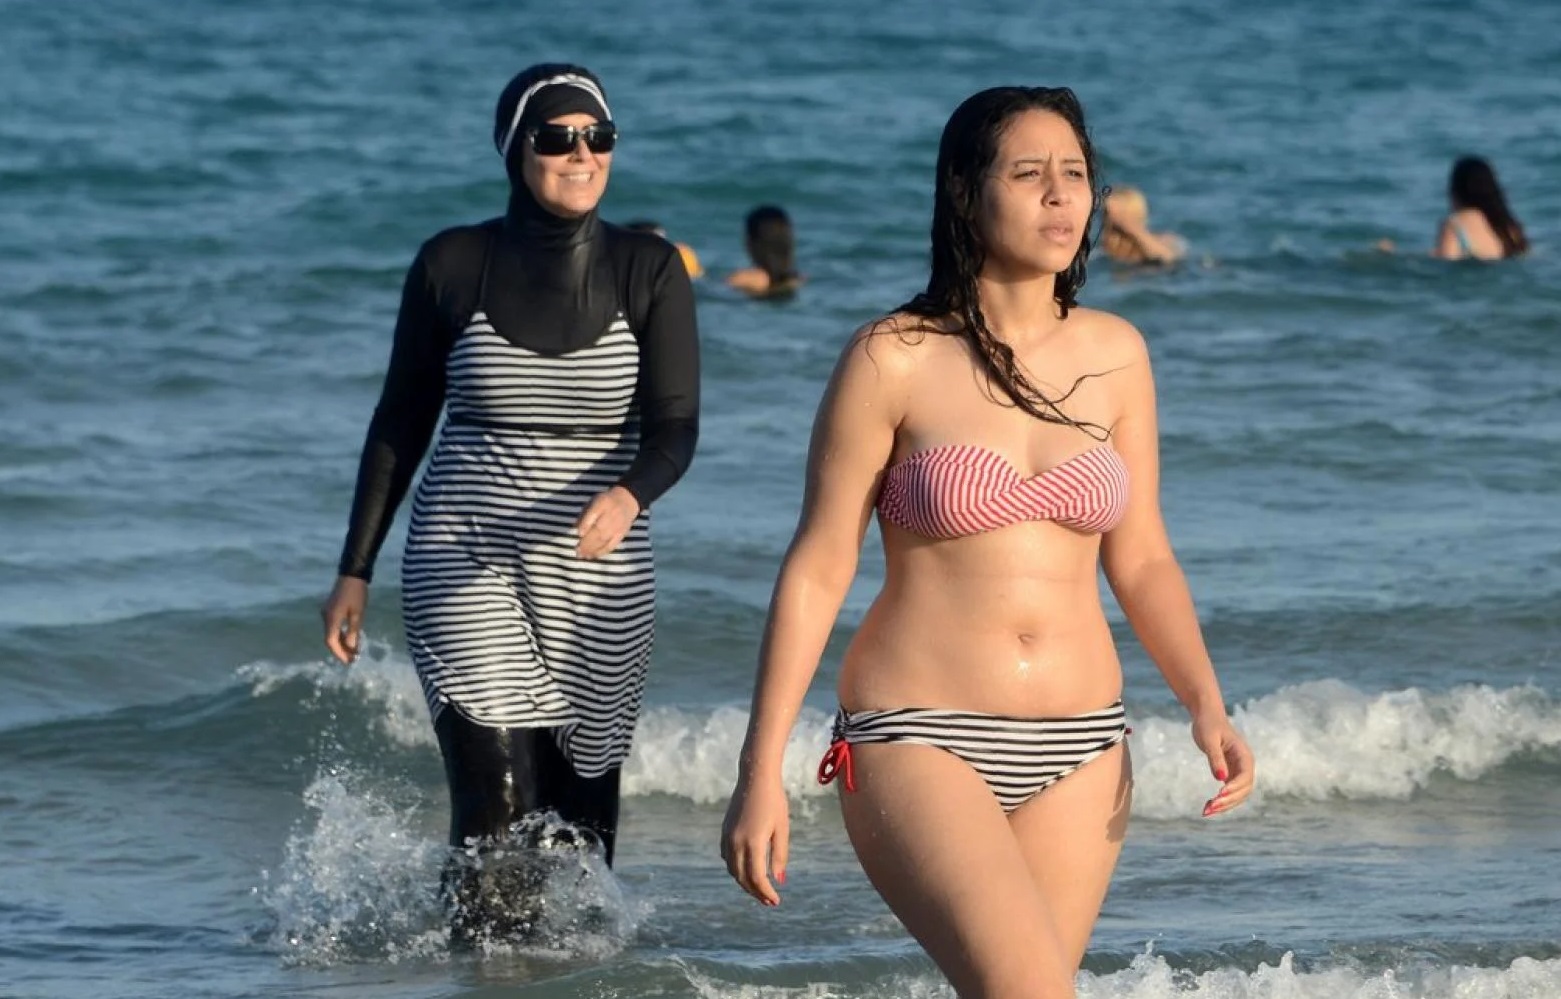 No place for Muslim Women in Grenoble’s public pools, rules top French court